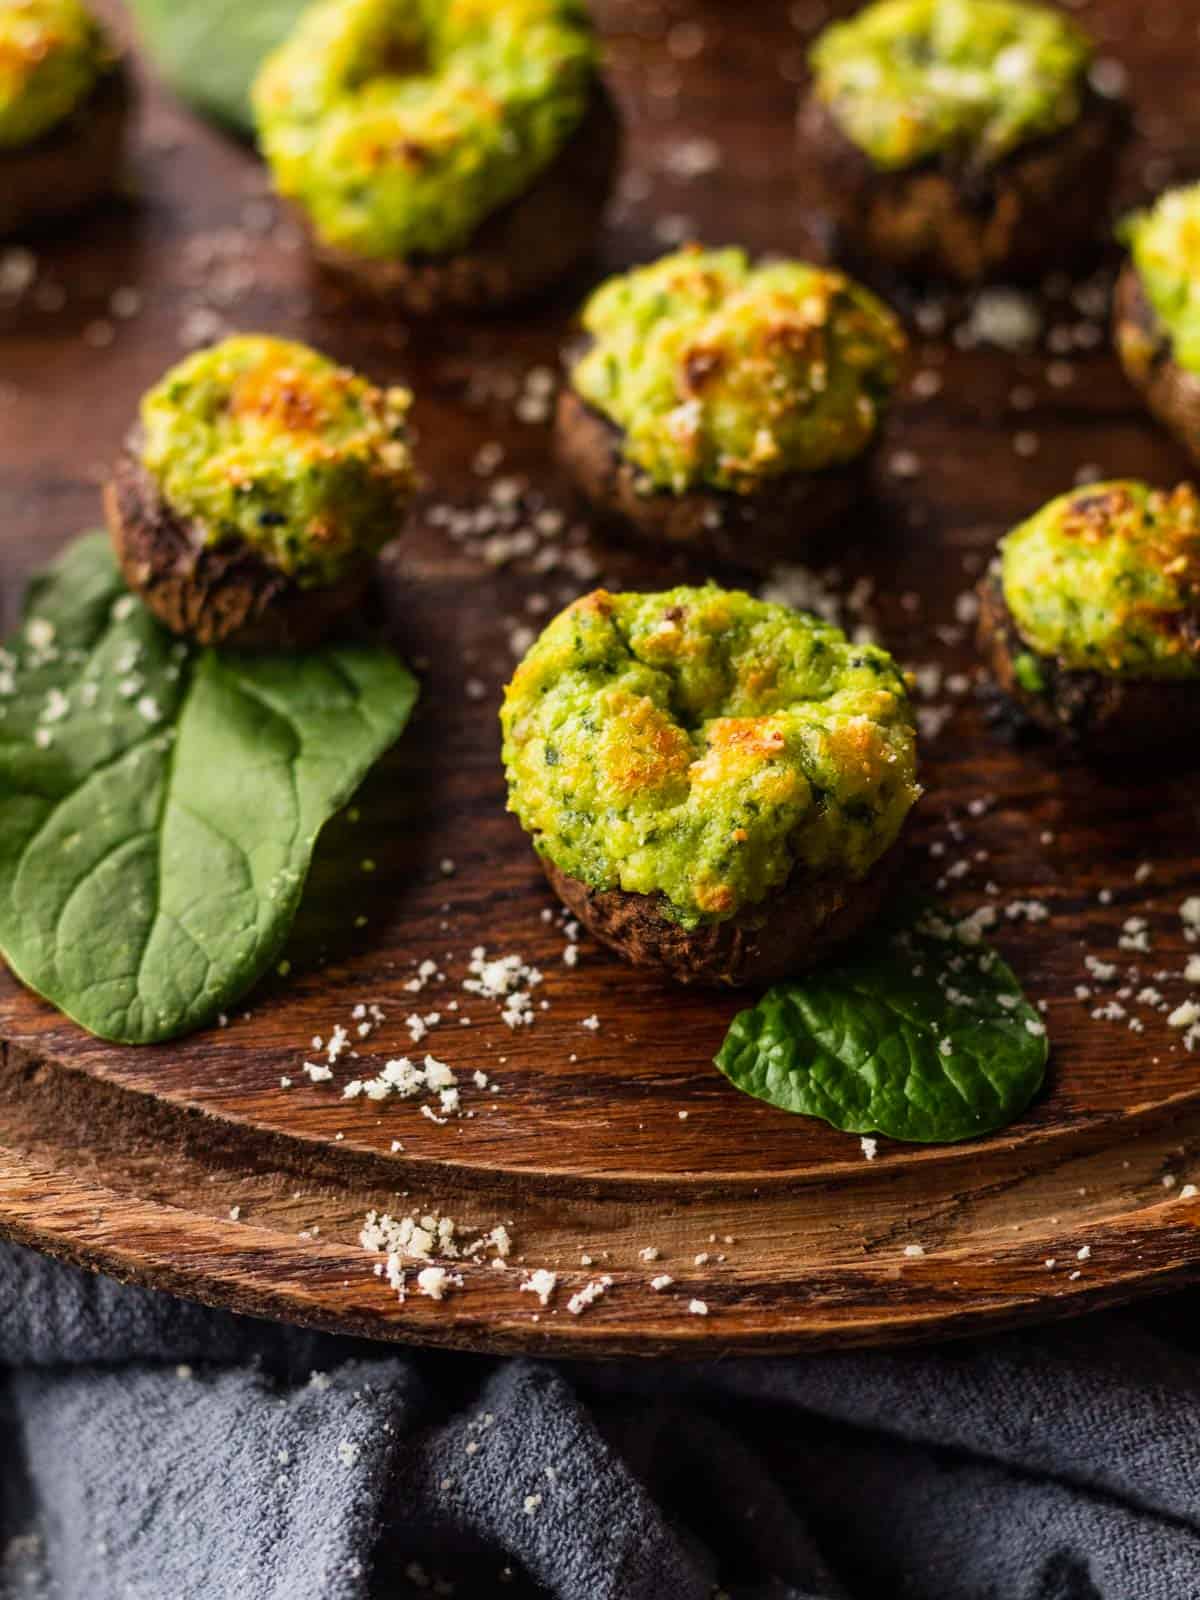 ricotta and spinach stuffed mushrooms on a wooden tray with fresh spinach leaves and sprinkled cheese.